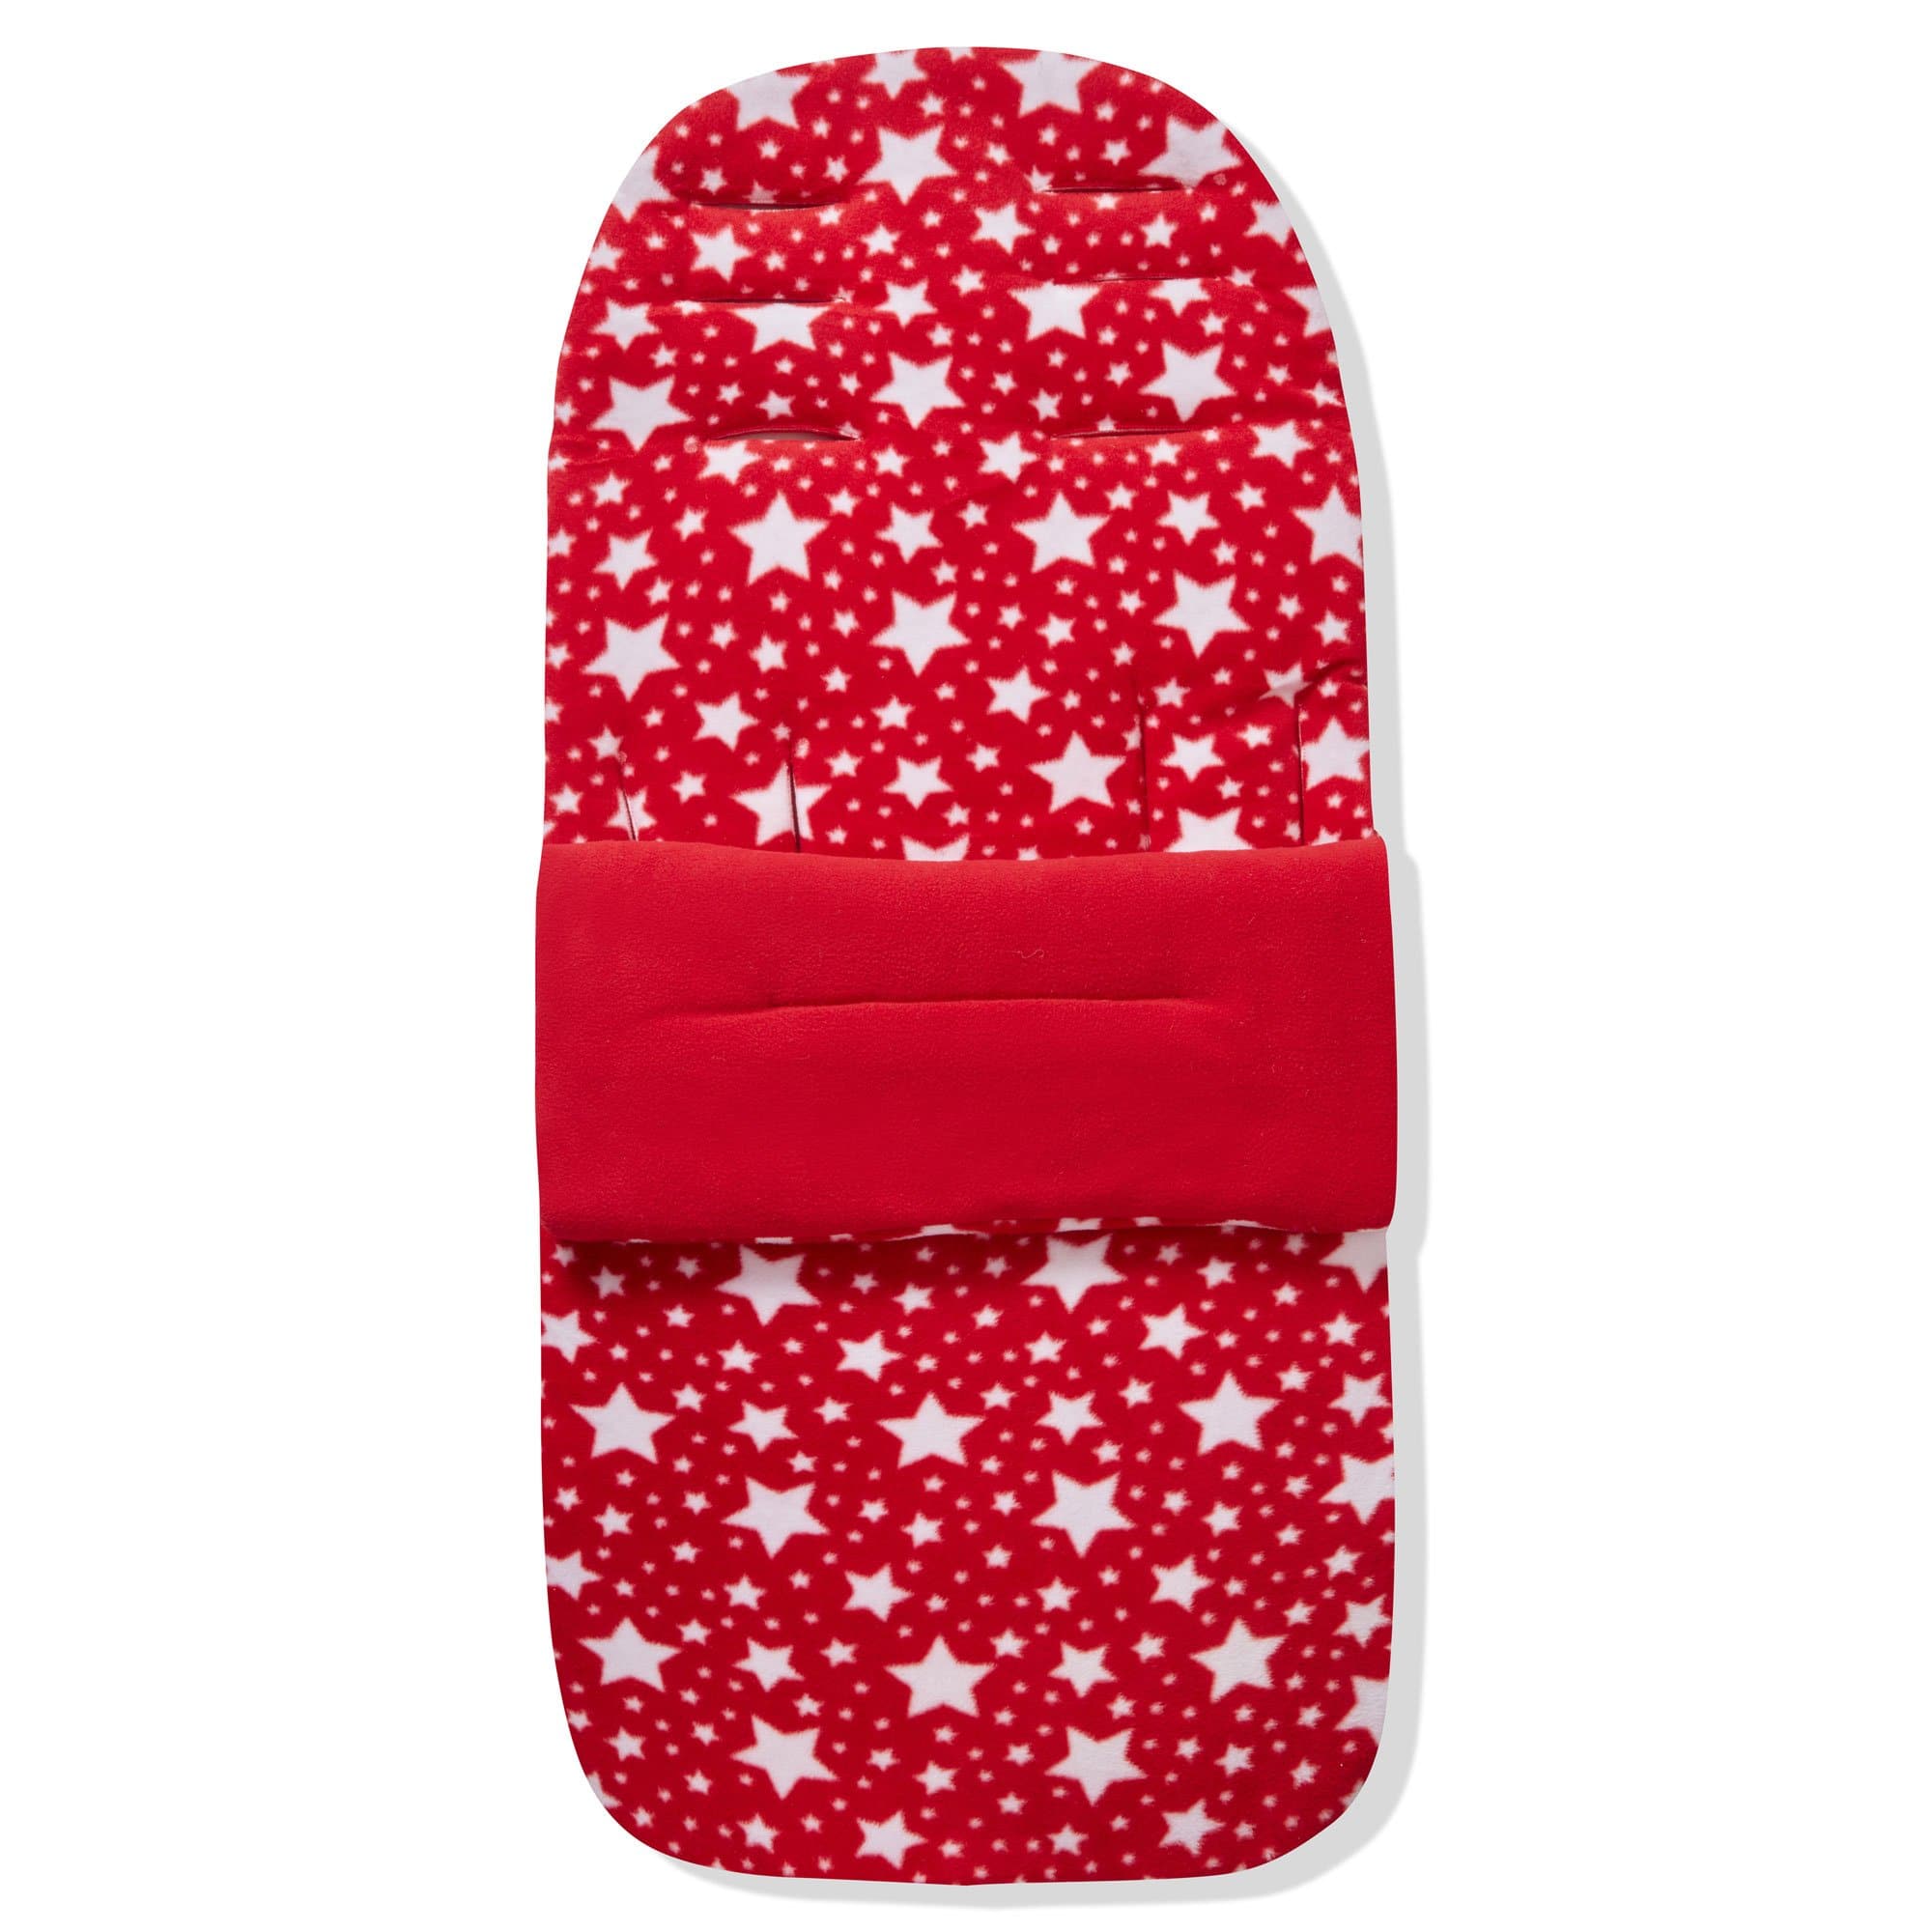 Fleece Footmuff / Cosy Toes Compatible with Mamas & Papas - Red Star / Fits All Models | For Your Little One